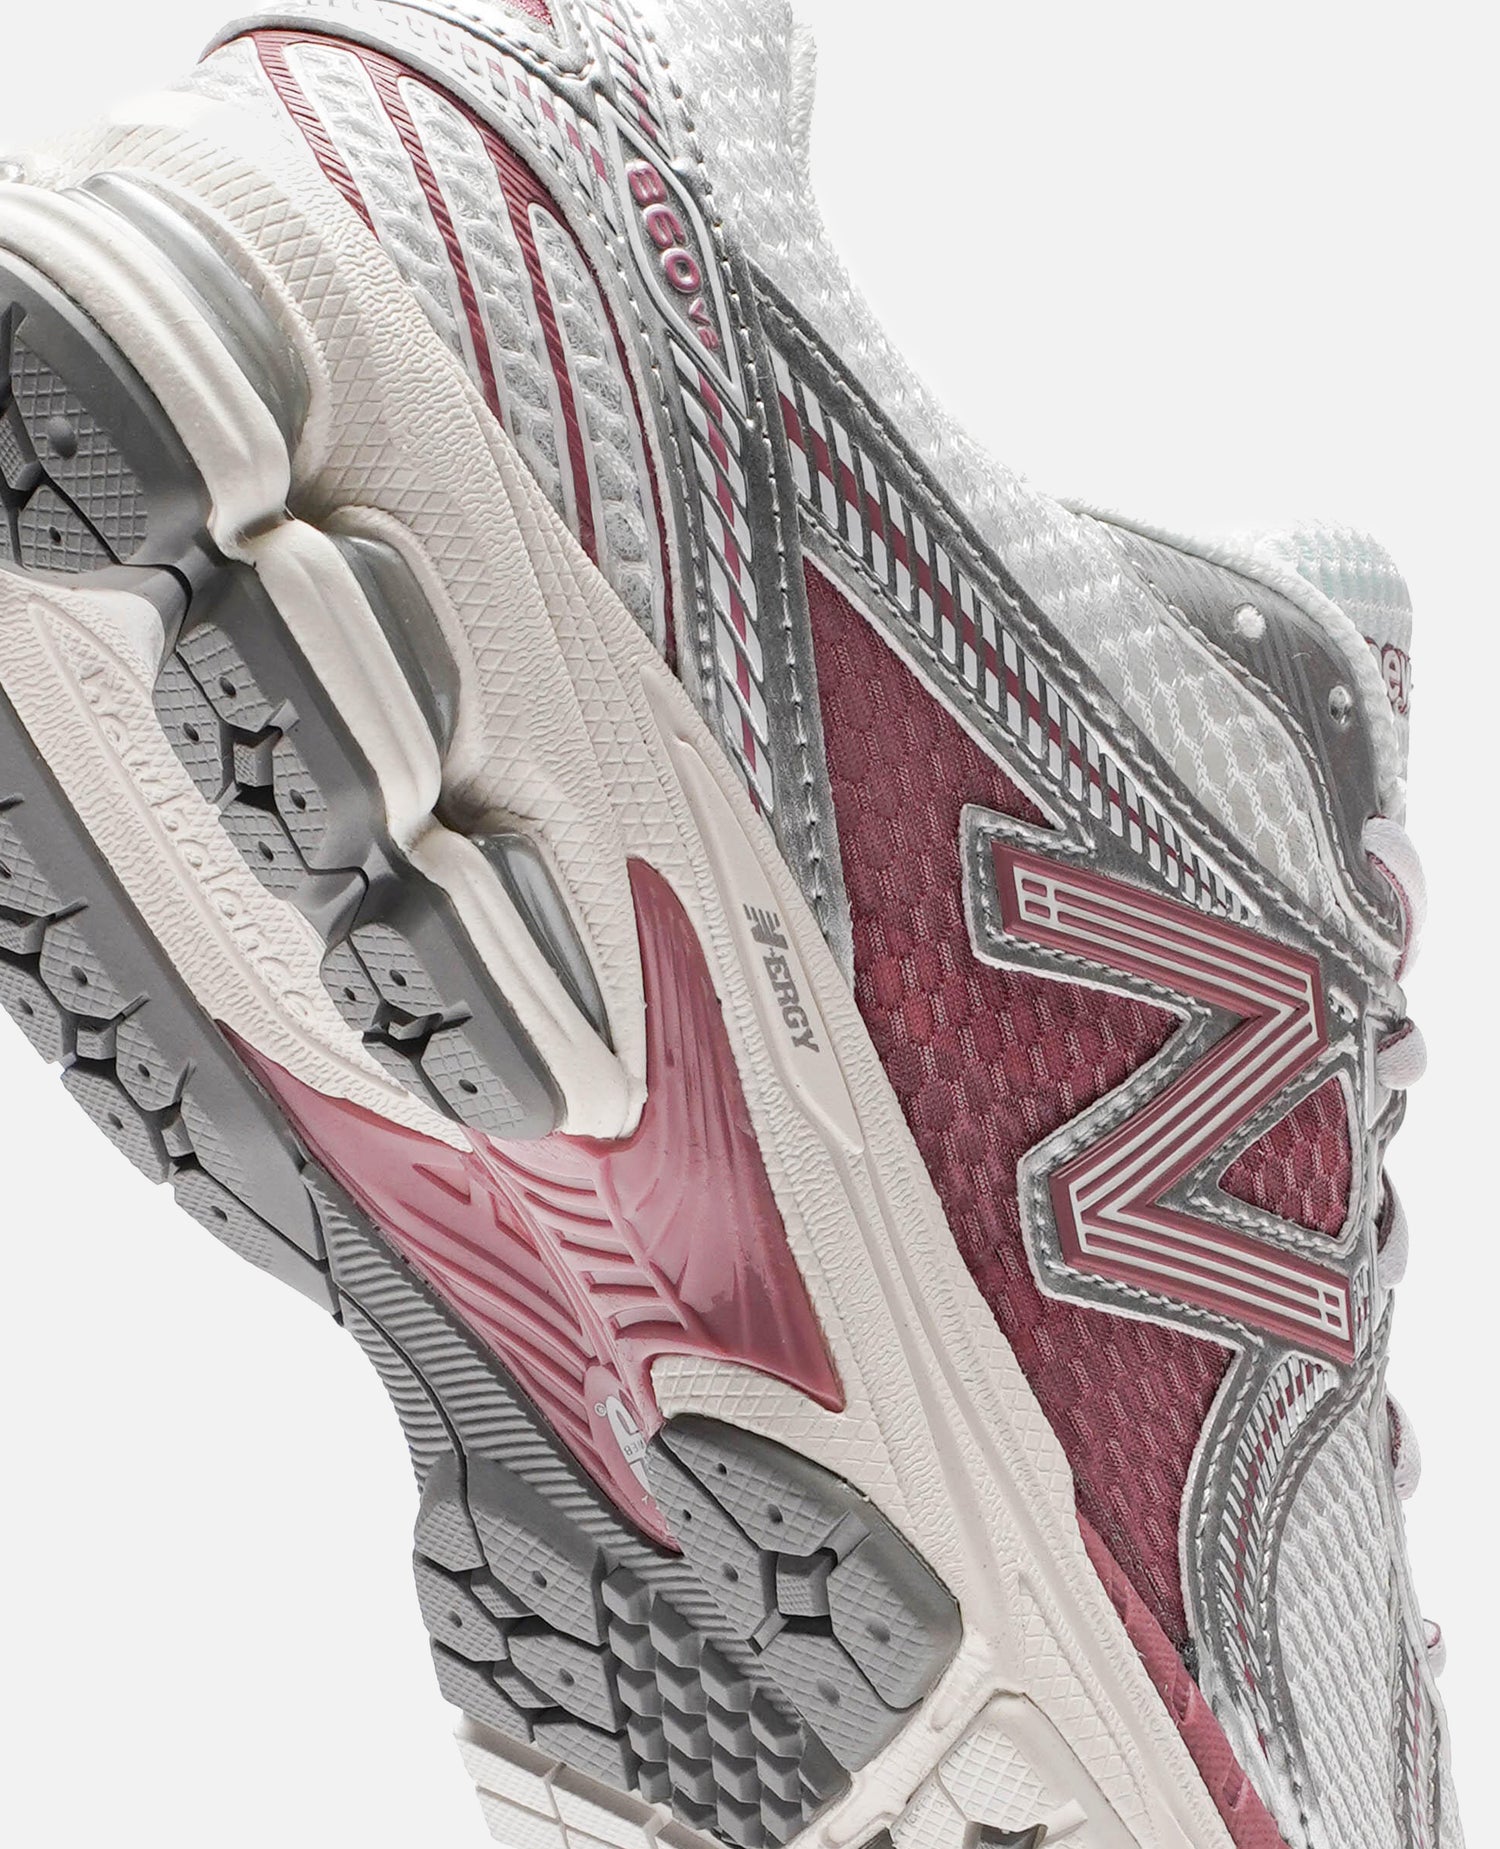 New Balance 860V2 Silver Toe Pink (White/Silver-Pink)